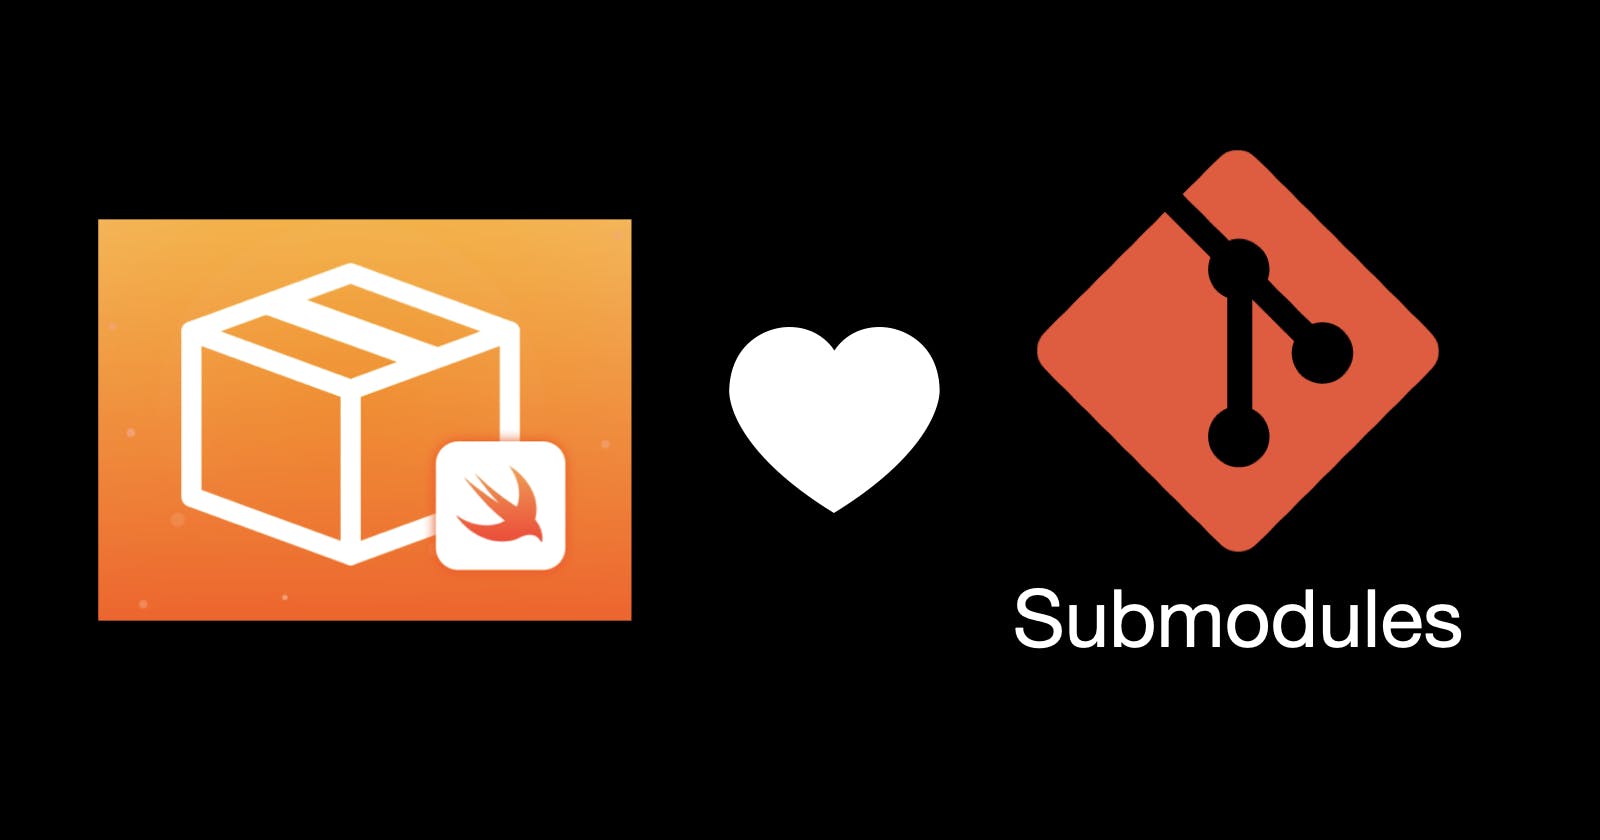 Swift Package Manager supports Git Submodules